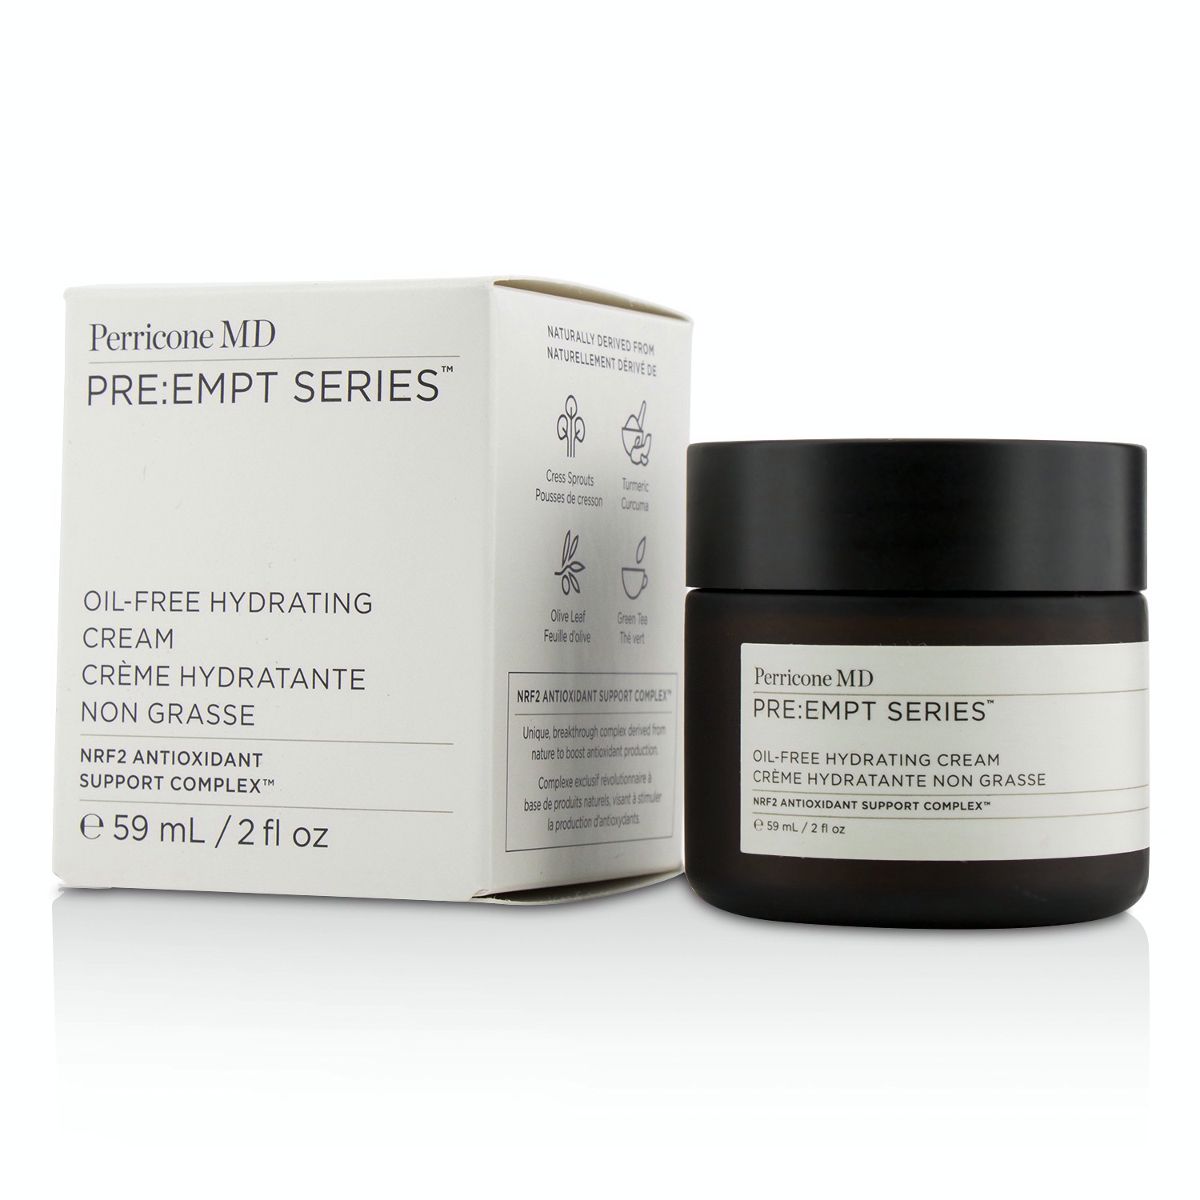 Pre:Empt Series Oil-Free Hydrating Cream Perricone MD Image